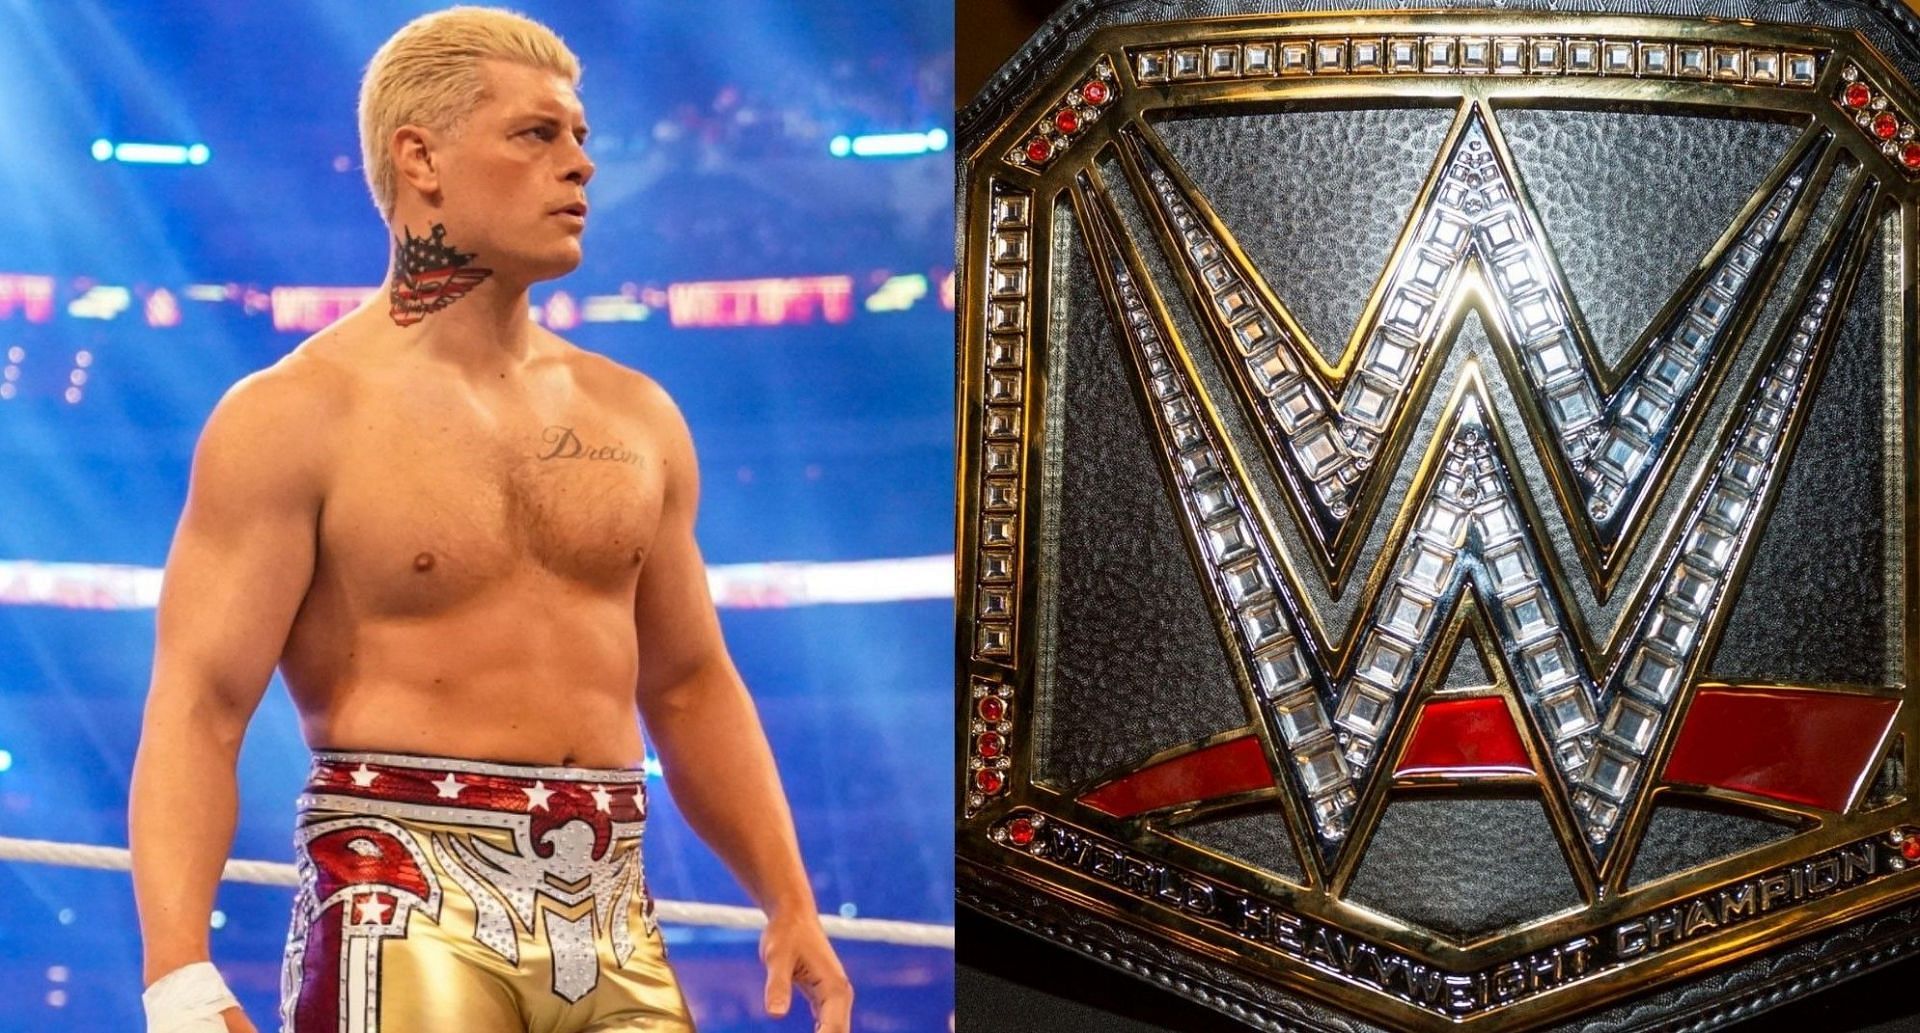 Cody Rhodes and the WWE Championship.